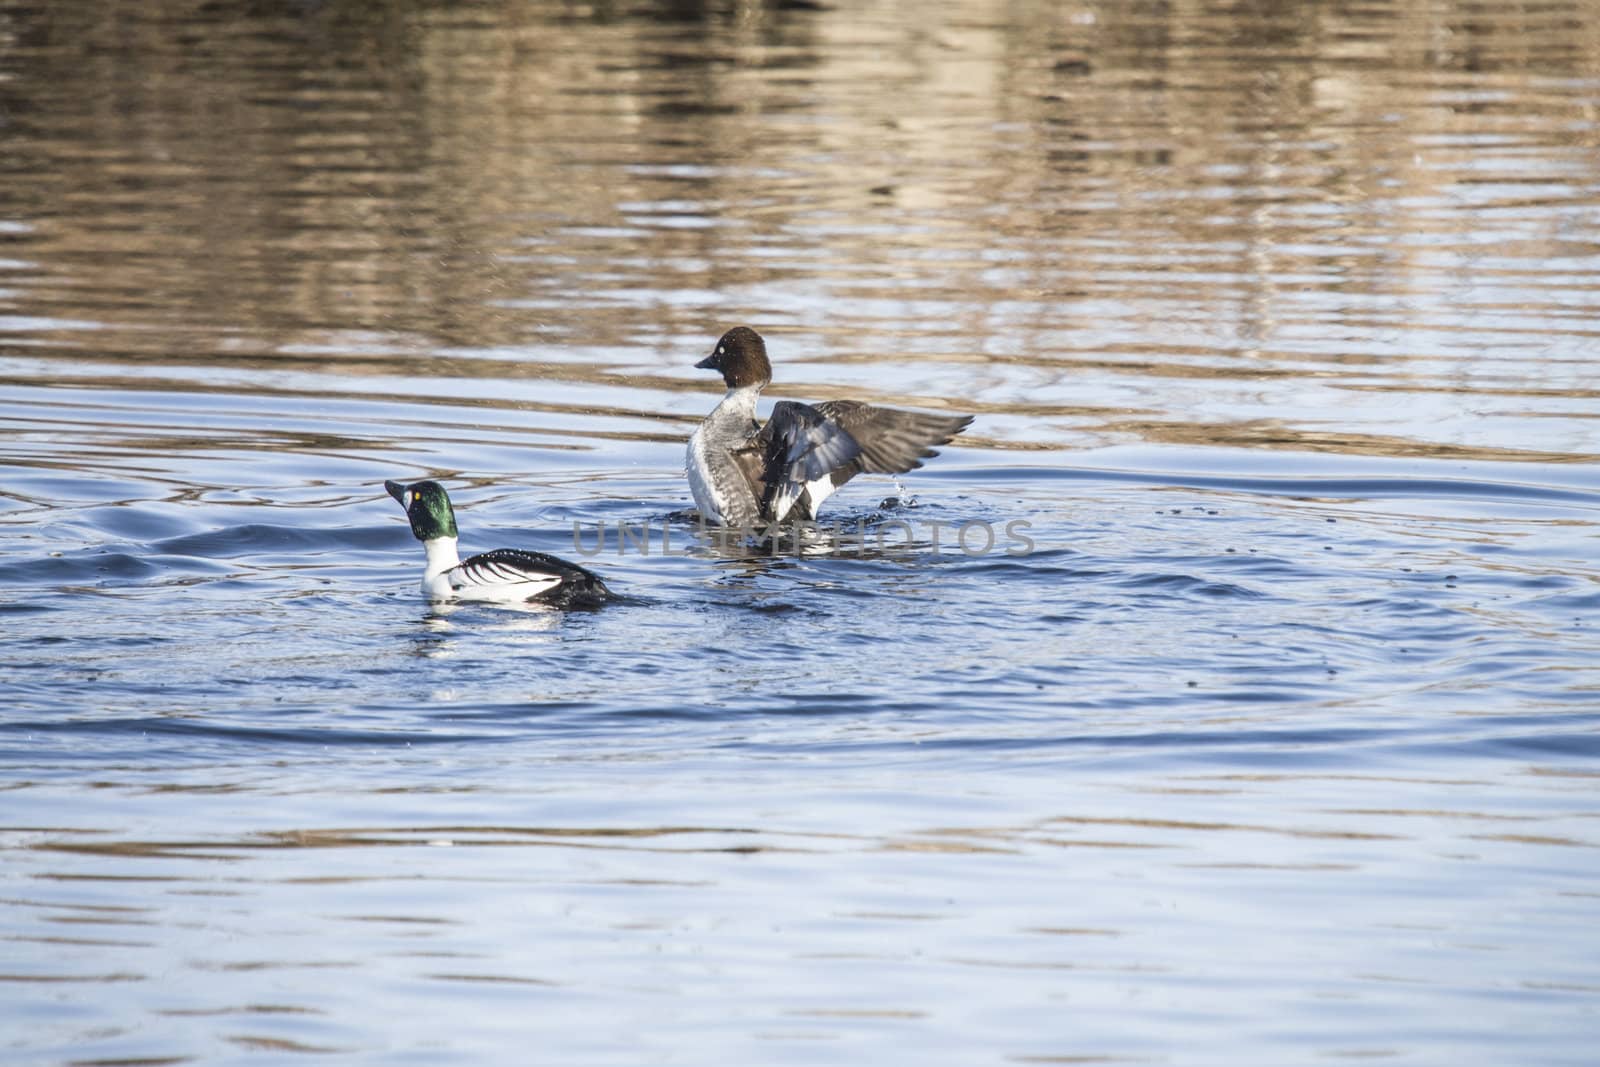 all images of the goldeneyes is shot in the tista river in halden city in march 2013, the goldeneyes is currently in a rut that shows up in many strange expression